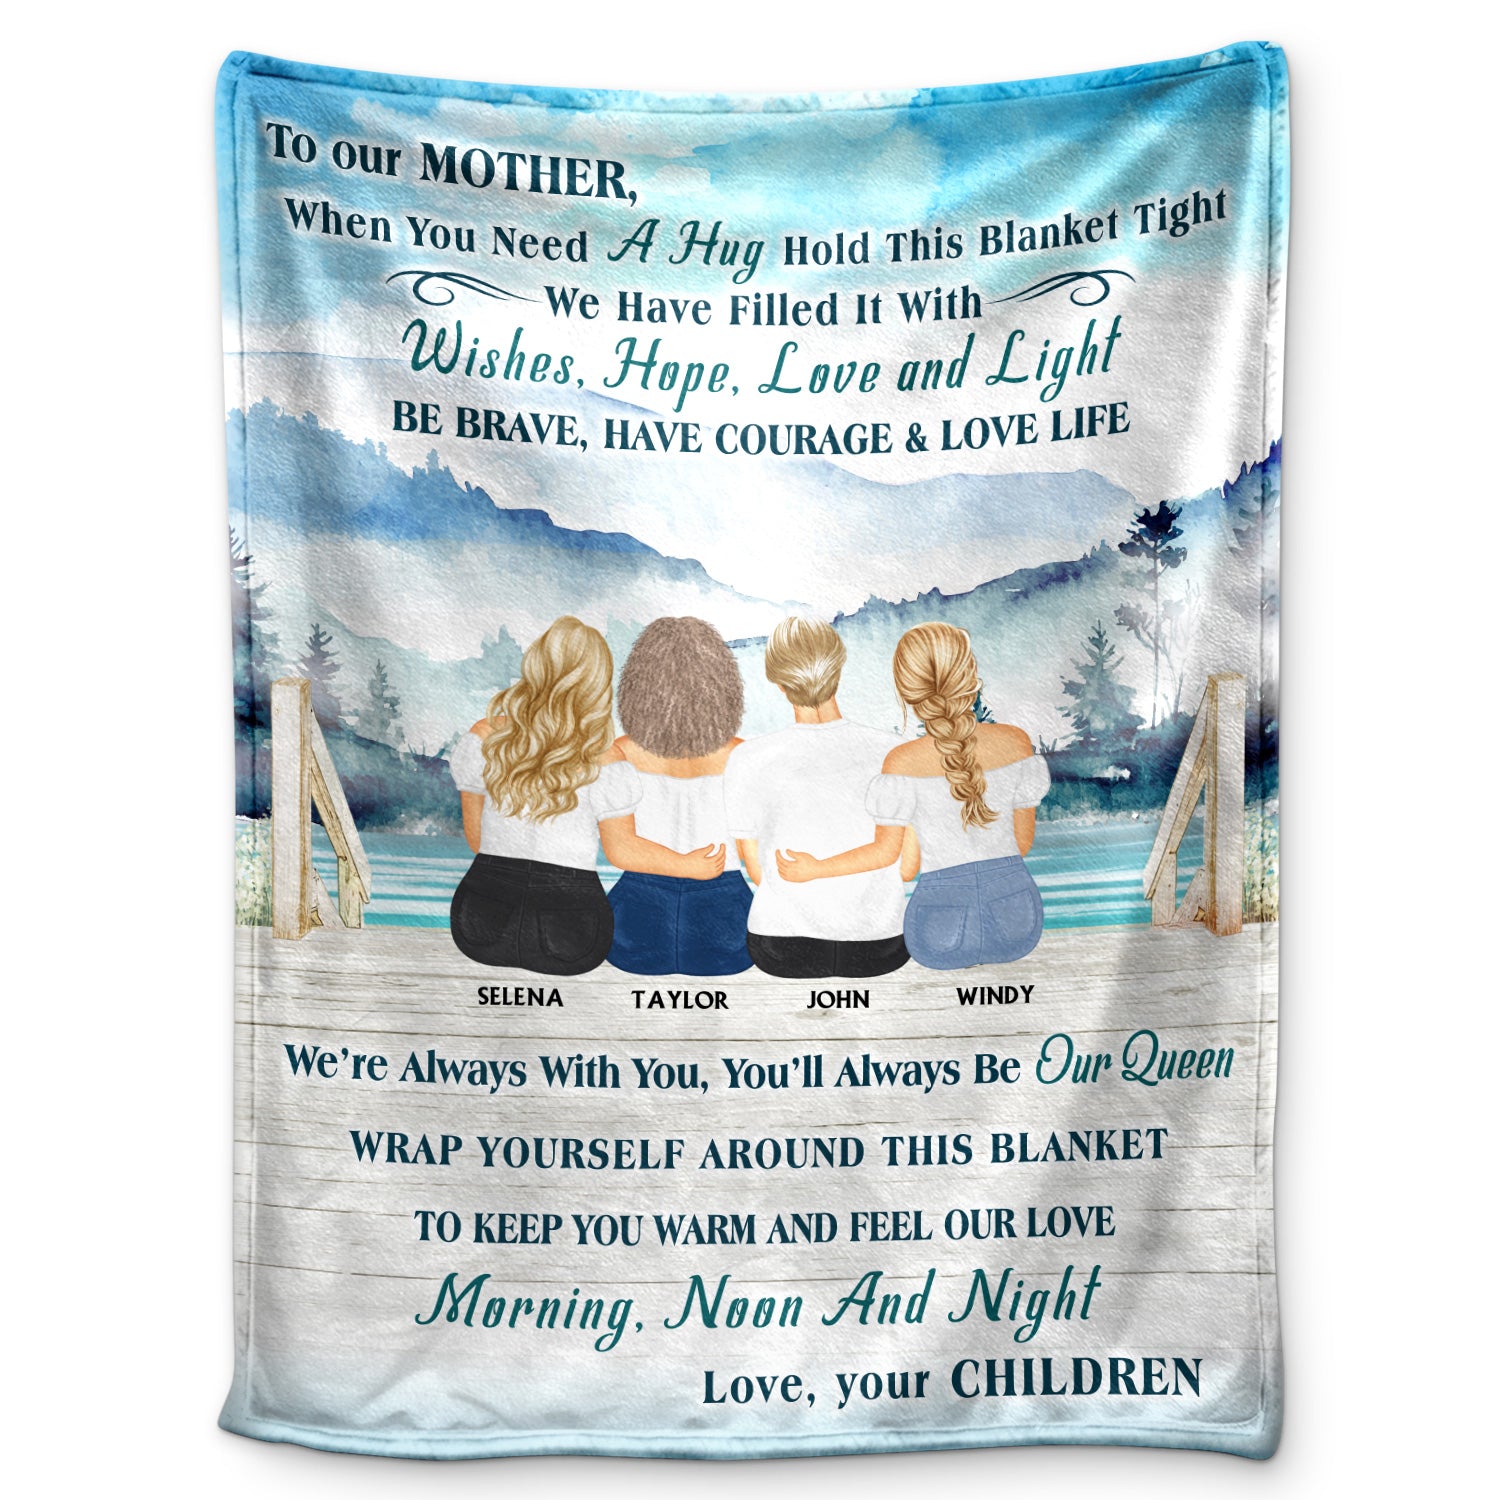 Lake Mother, Daughter And Son Hold This Blanket Tight - Gift For Mother - Personalized Custom Fleece Blanket